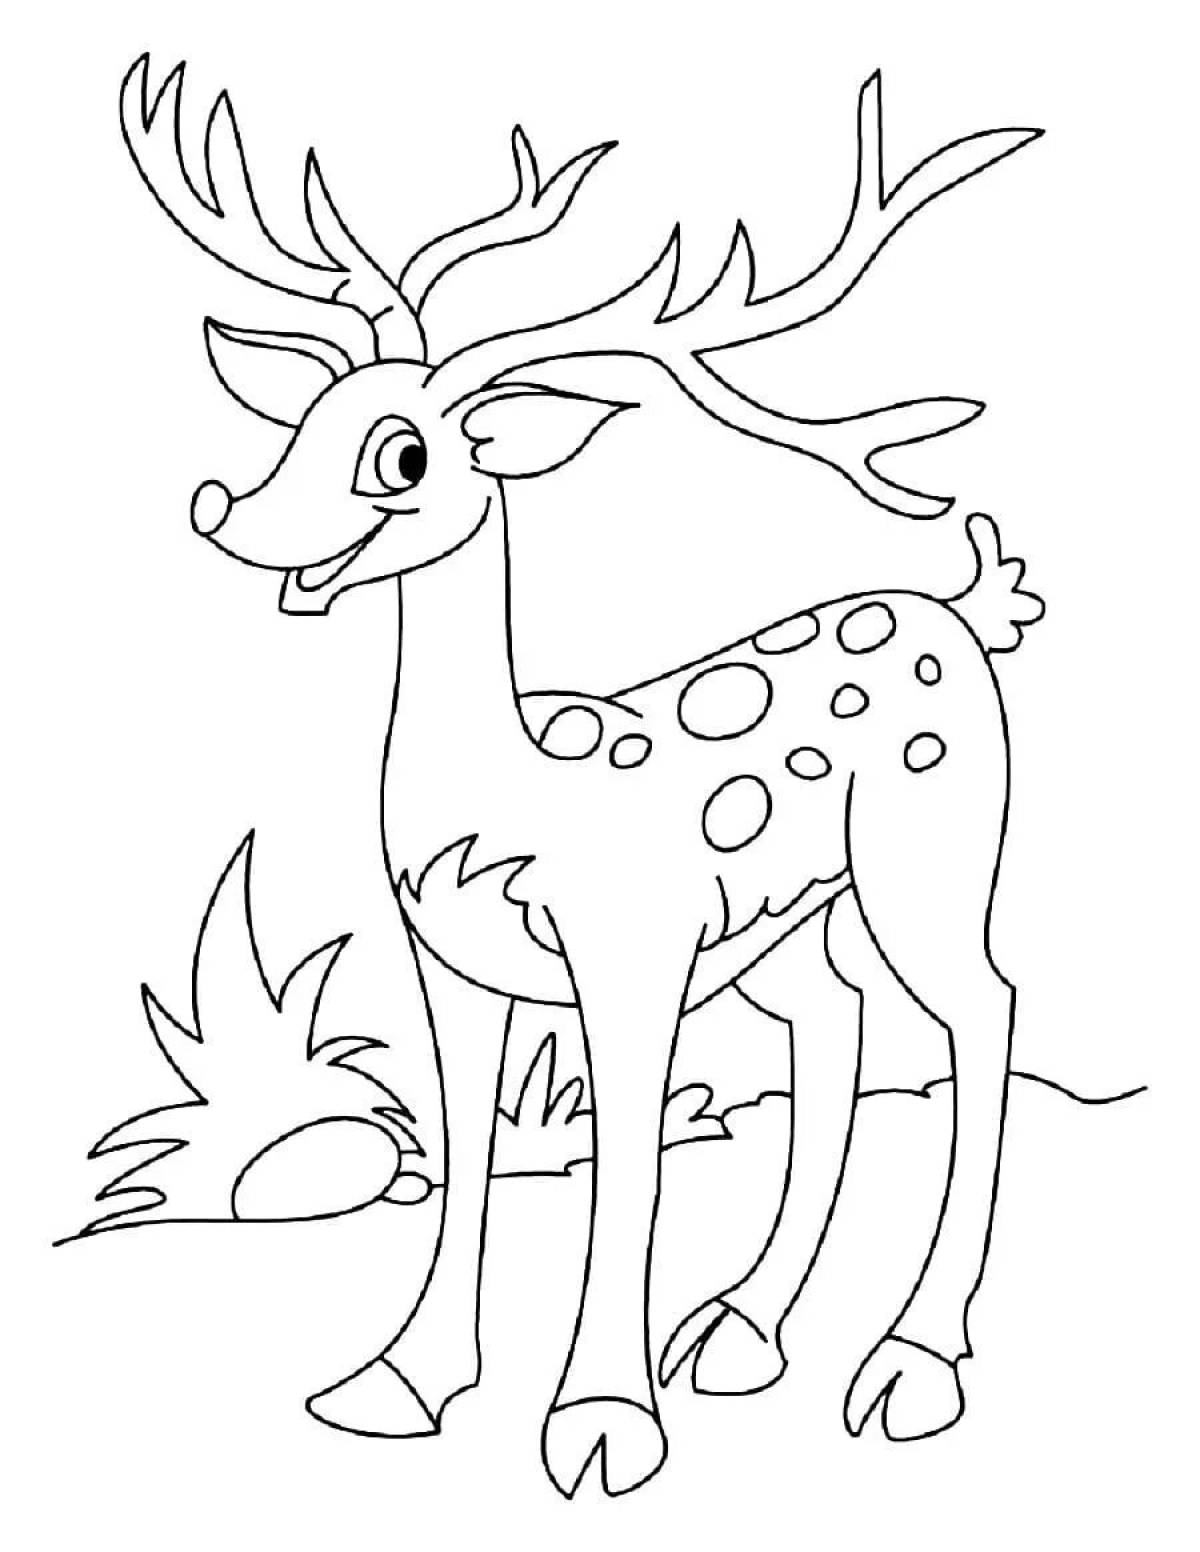 Amazing deer coloring book for kids 6-7 years old